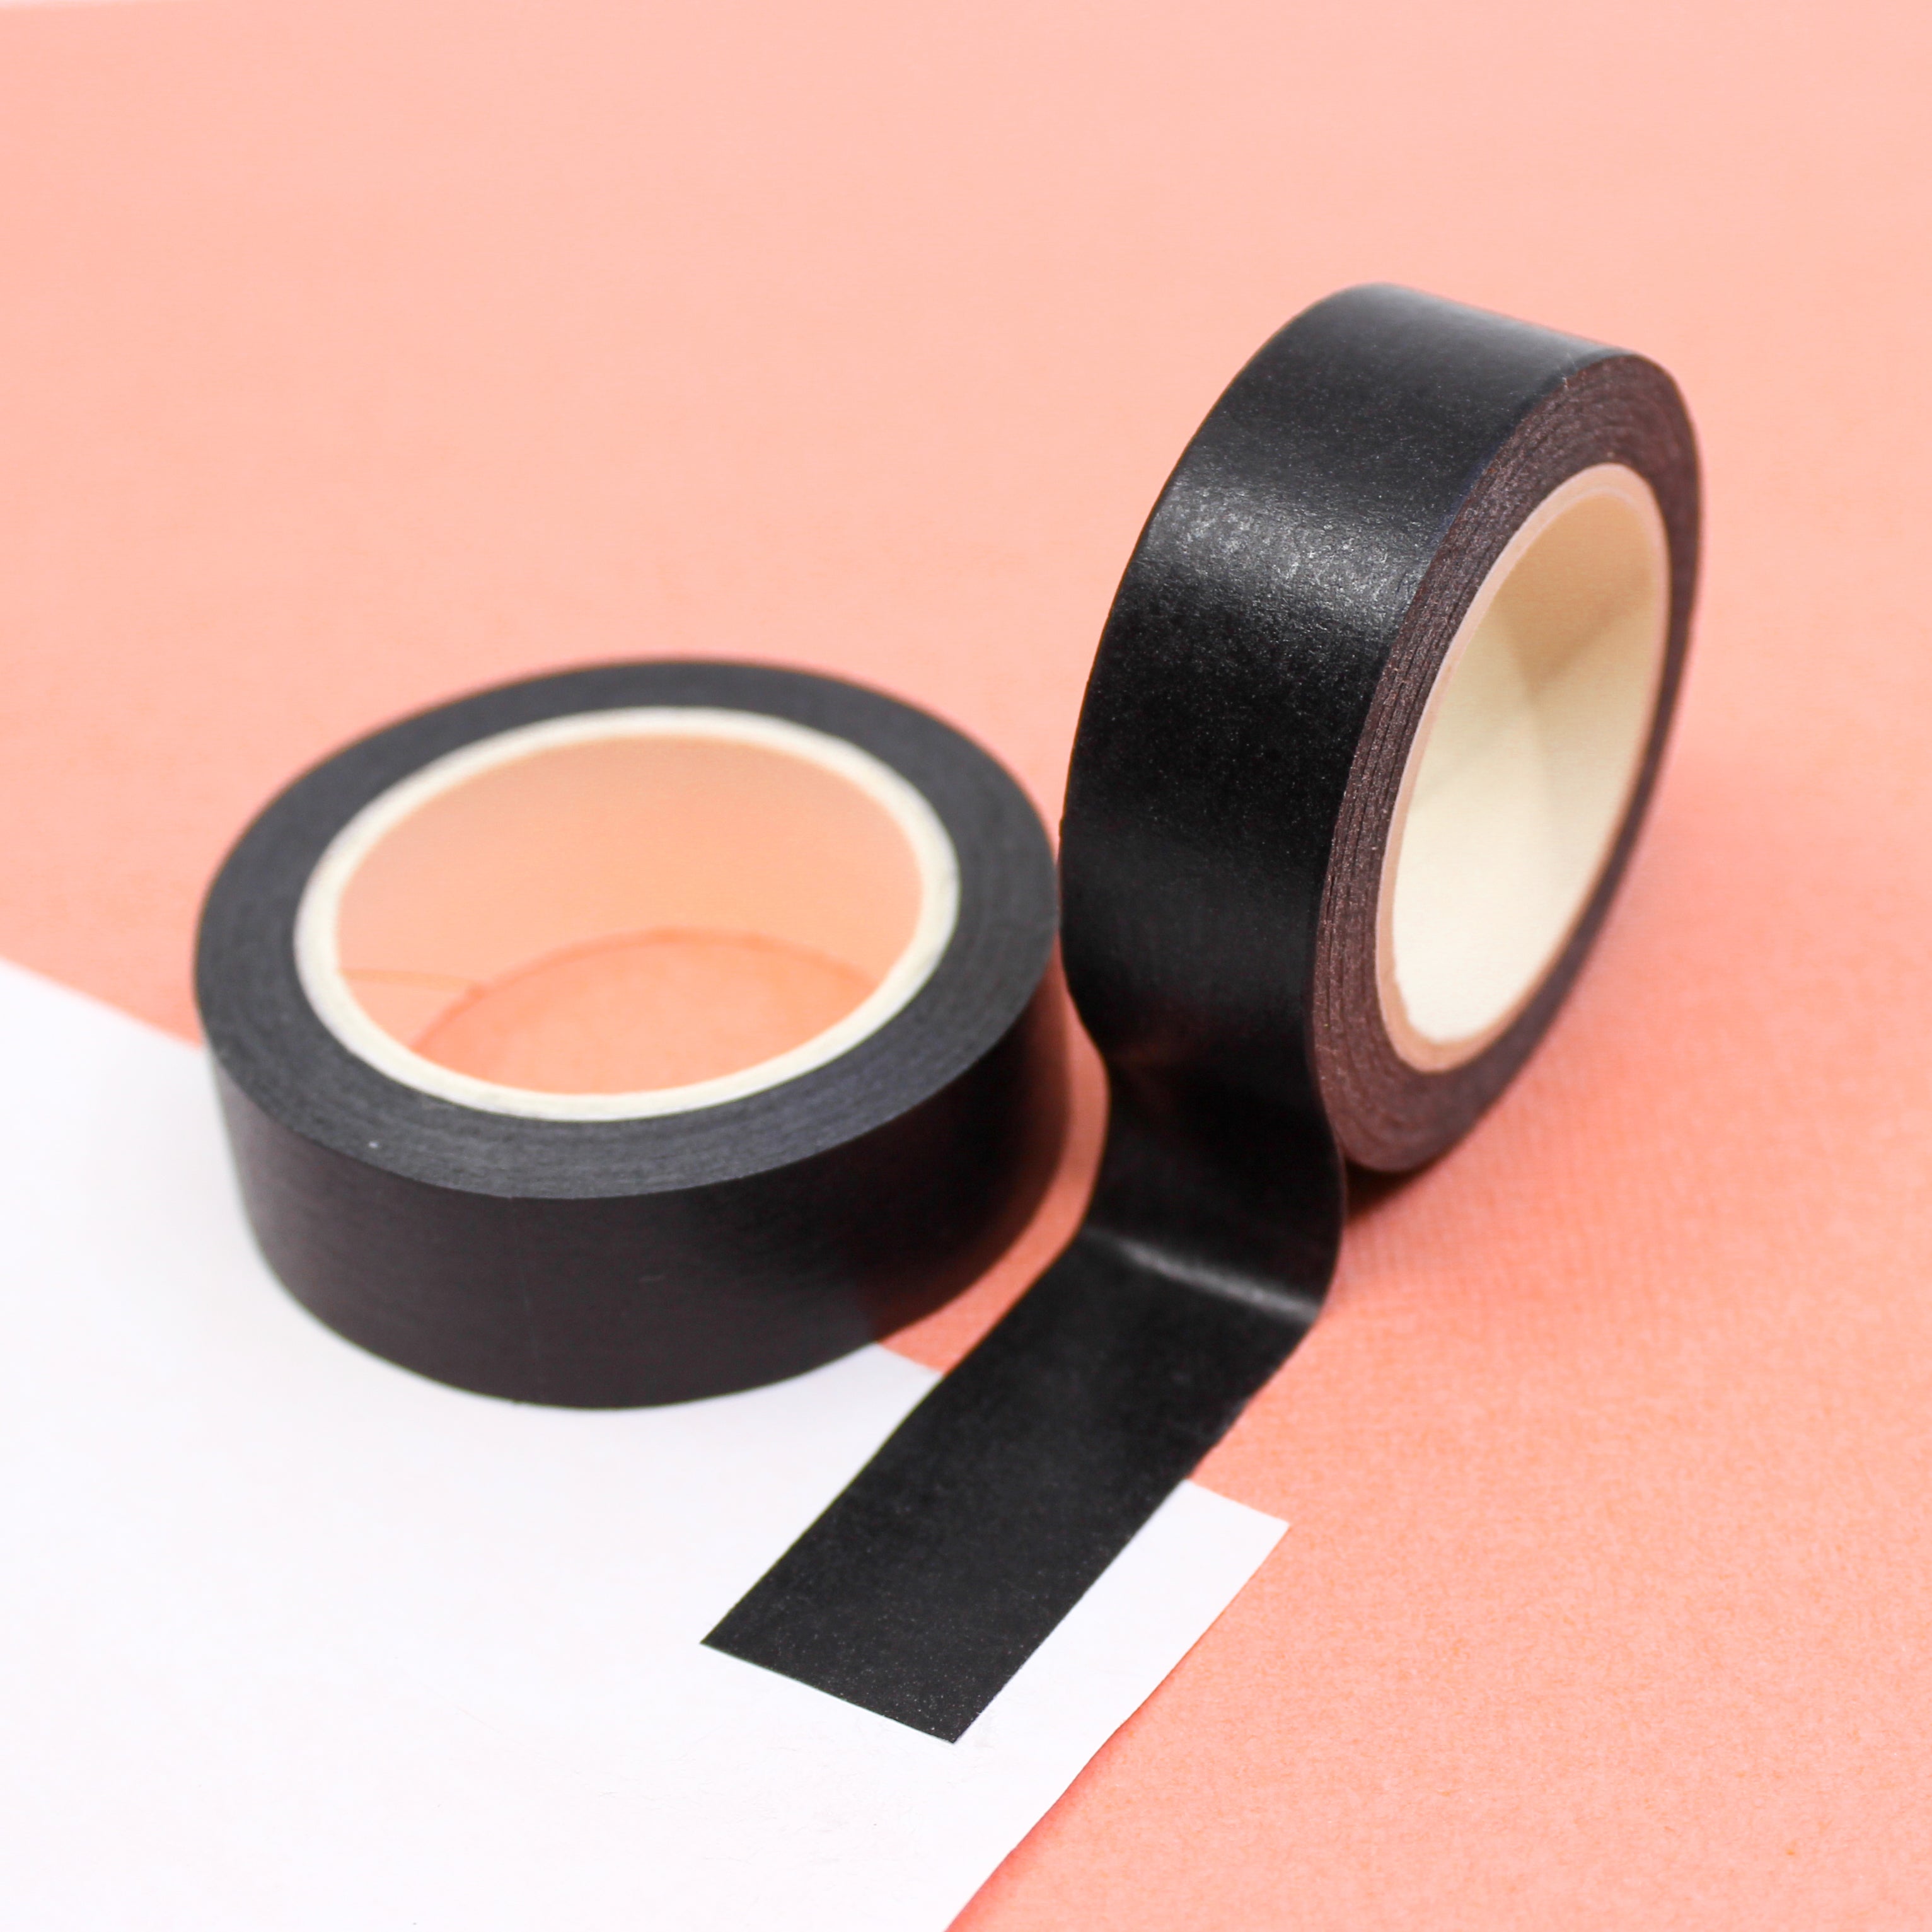 Elevate your creations with our captivating solid black washi tape, showcasing a bold and dramatic black tape that provides a versatile canvas for your crafts. This tape is sold at BBB Supplies Craft Shop.